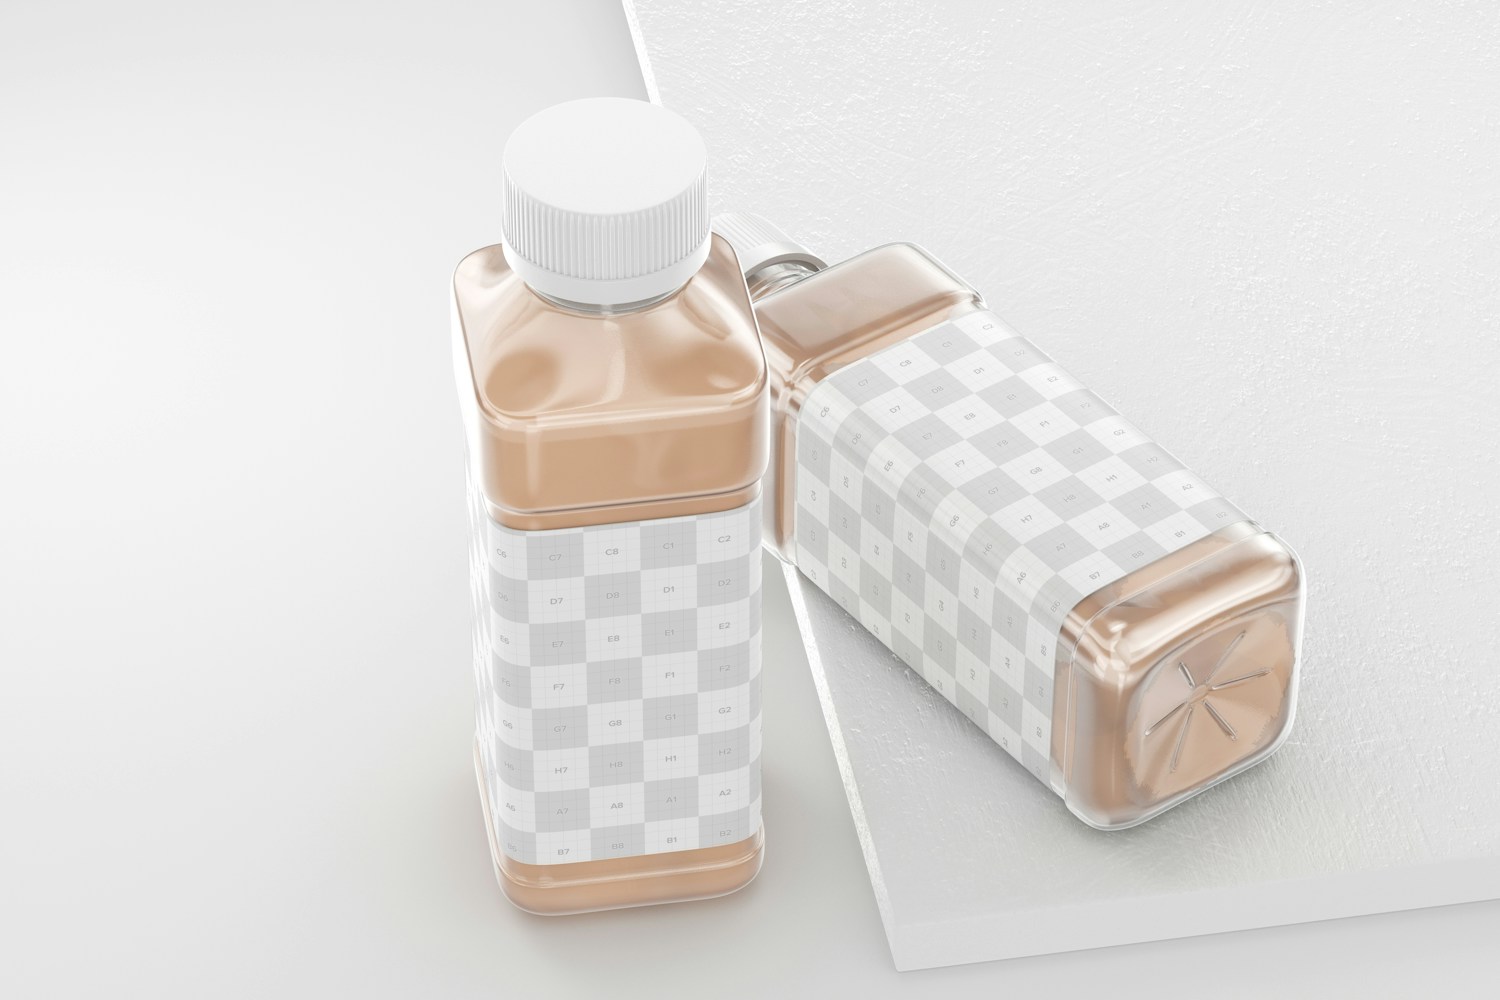 16 oz Iced Coffee Bottles Mockup, Standing and Dropped